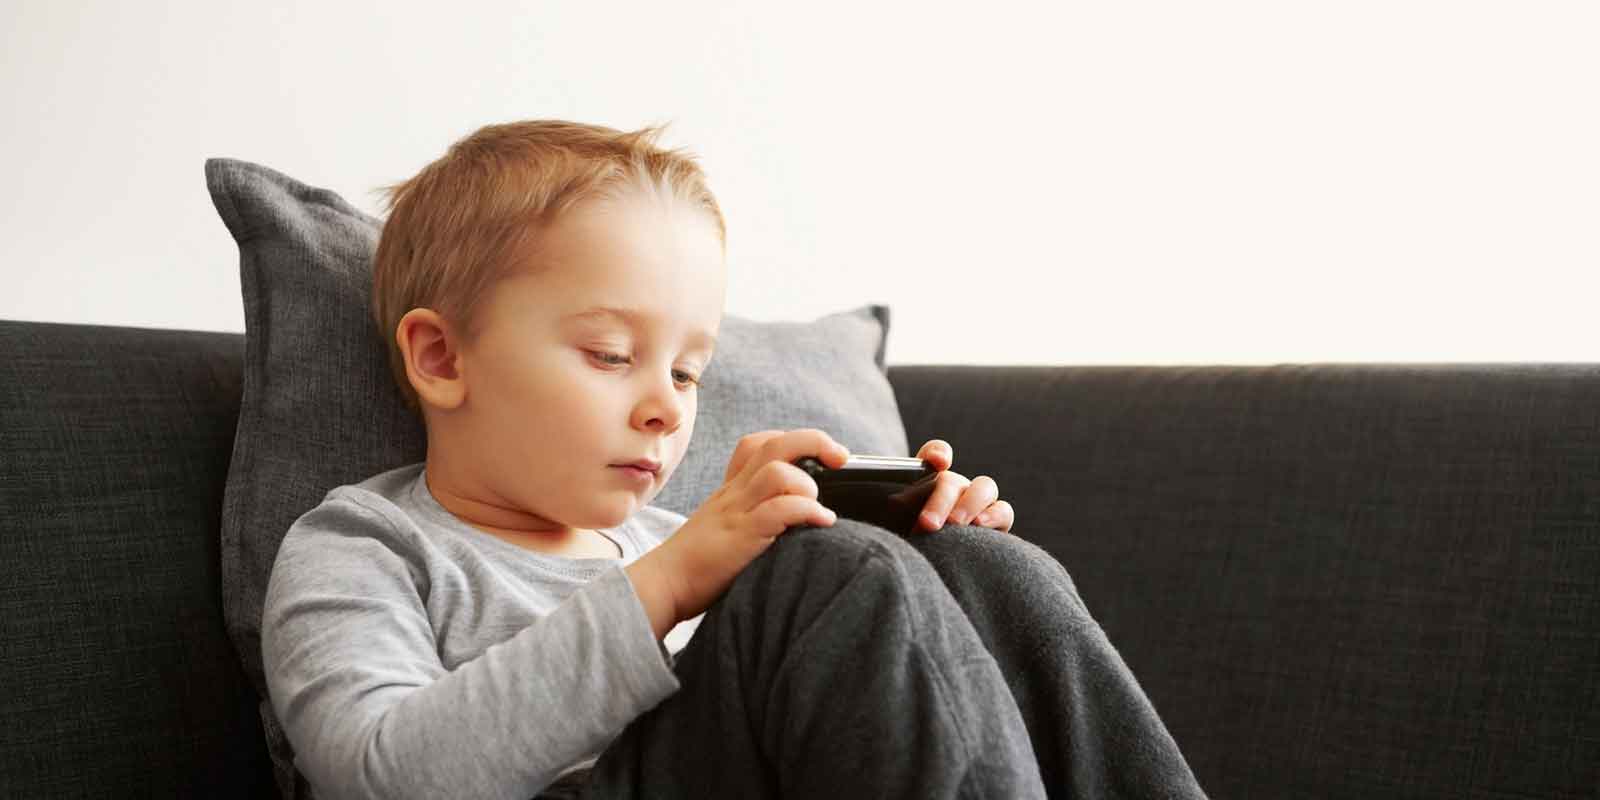 Developing Fine Motor Skills: A Boy looks at the screen of a smartphone.